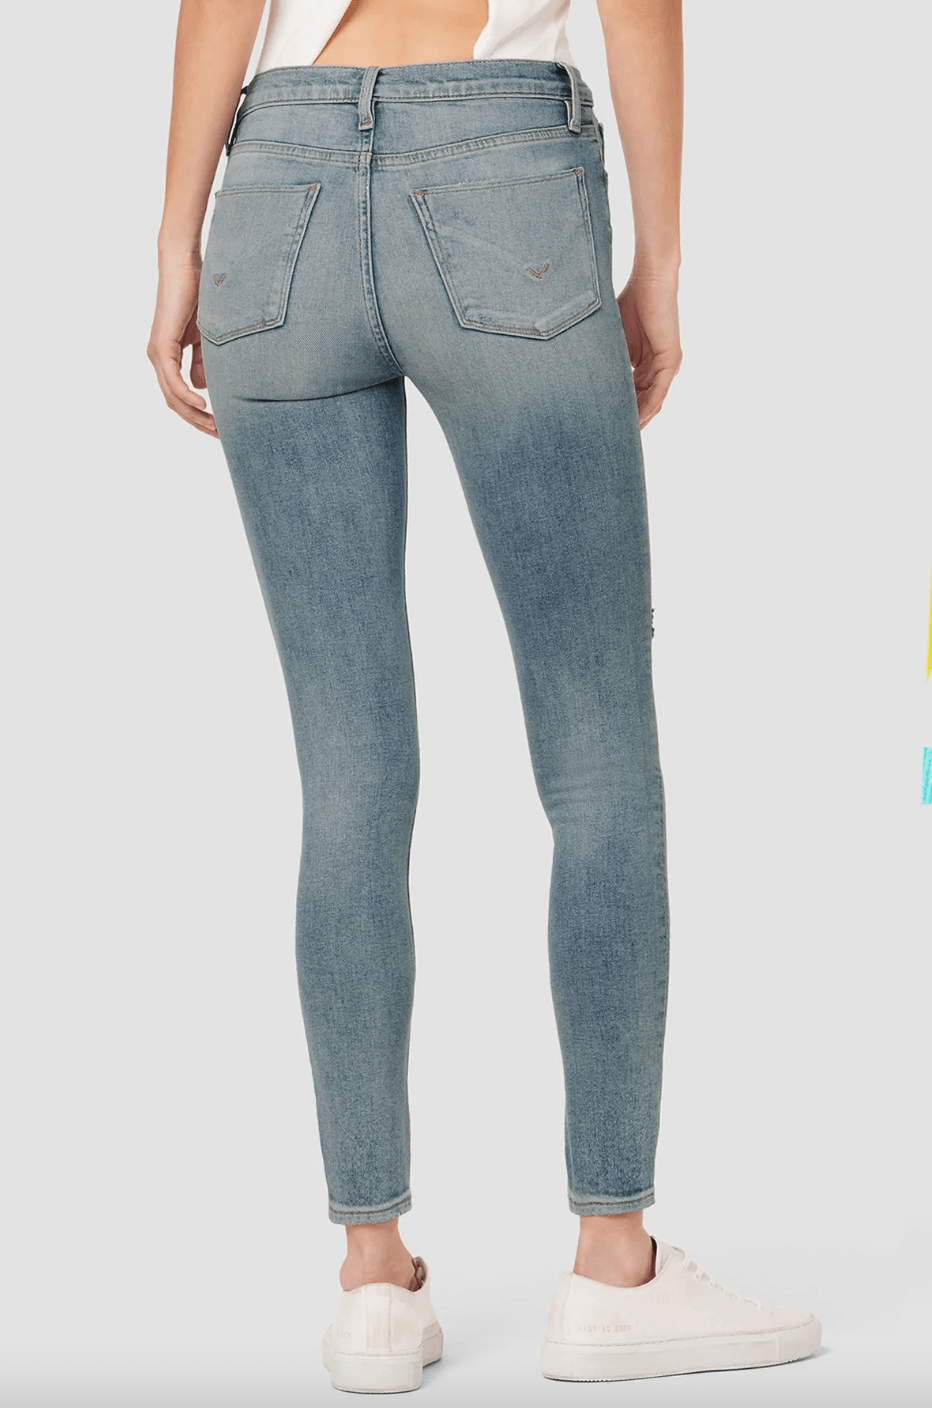 Barbara High Rise Super Skinny Ankle Jeans by Hudson (Various Colors) - Haven